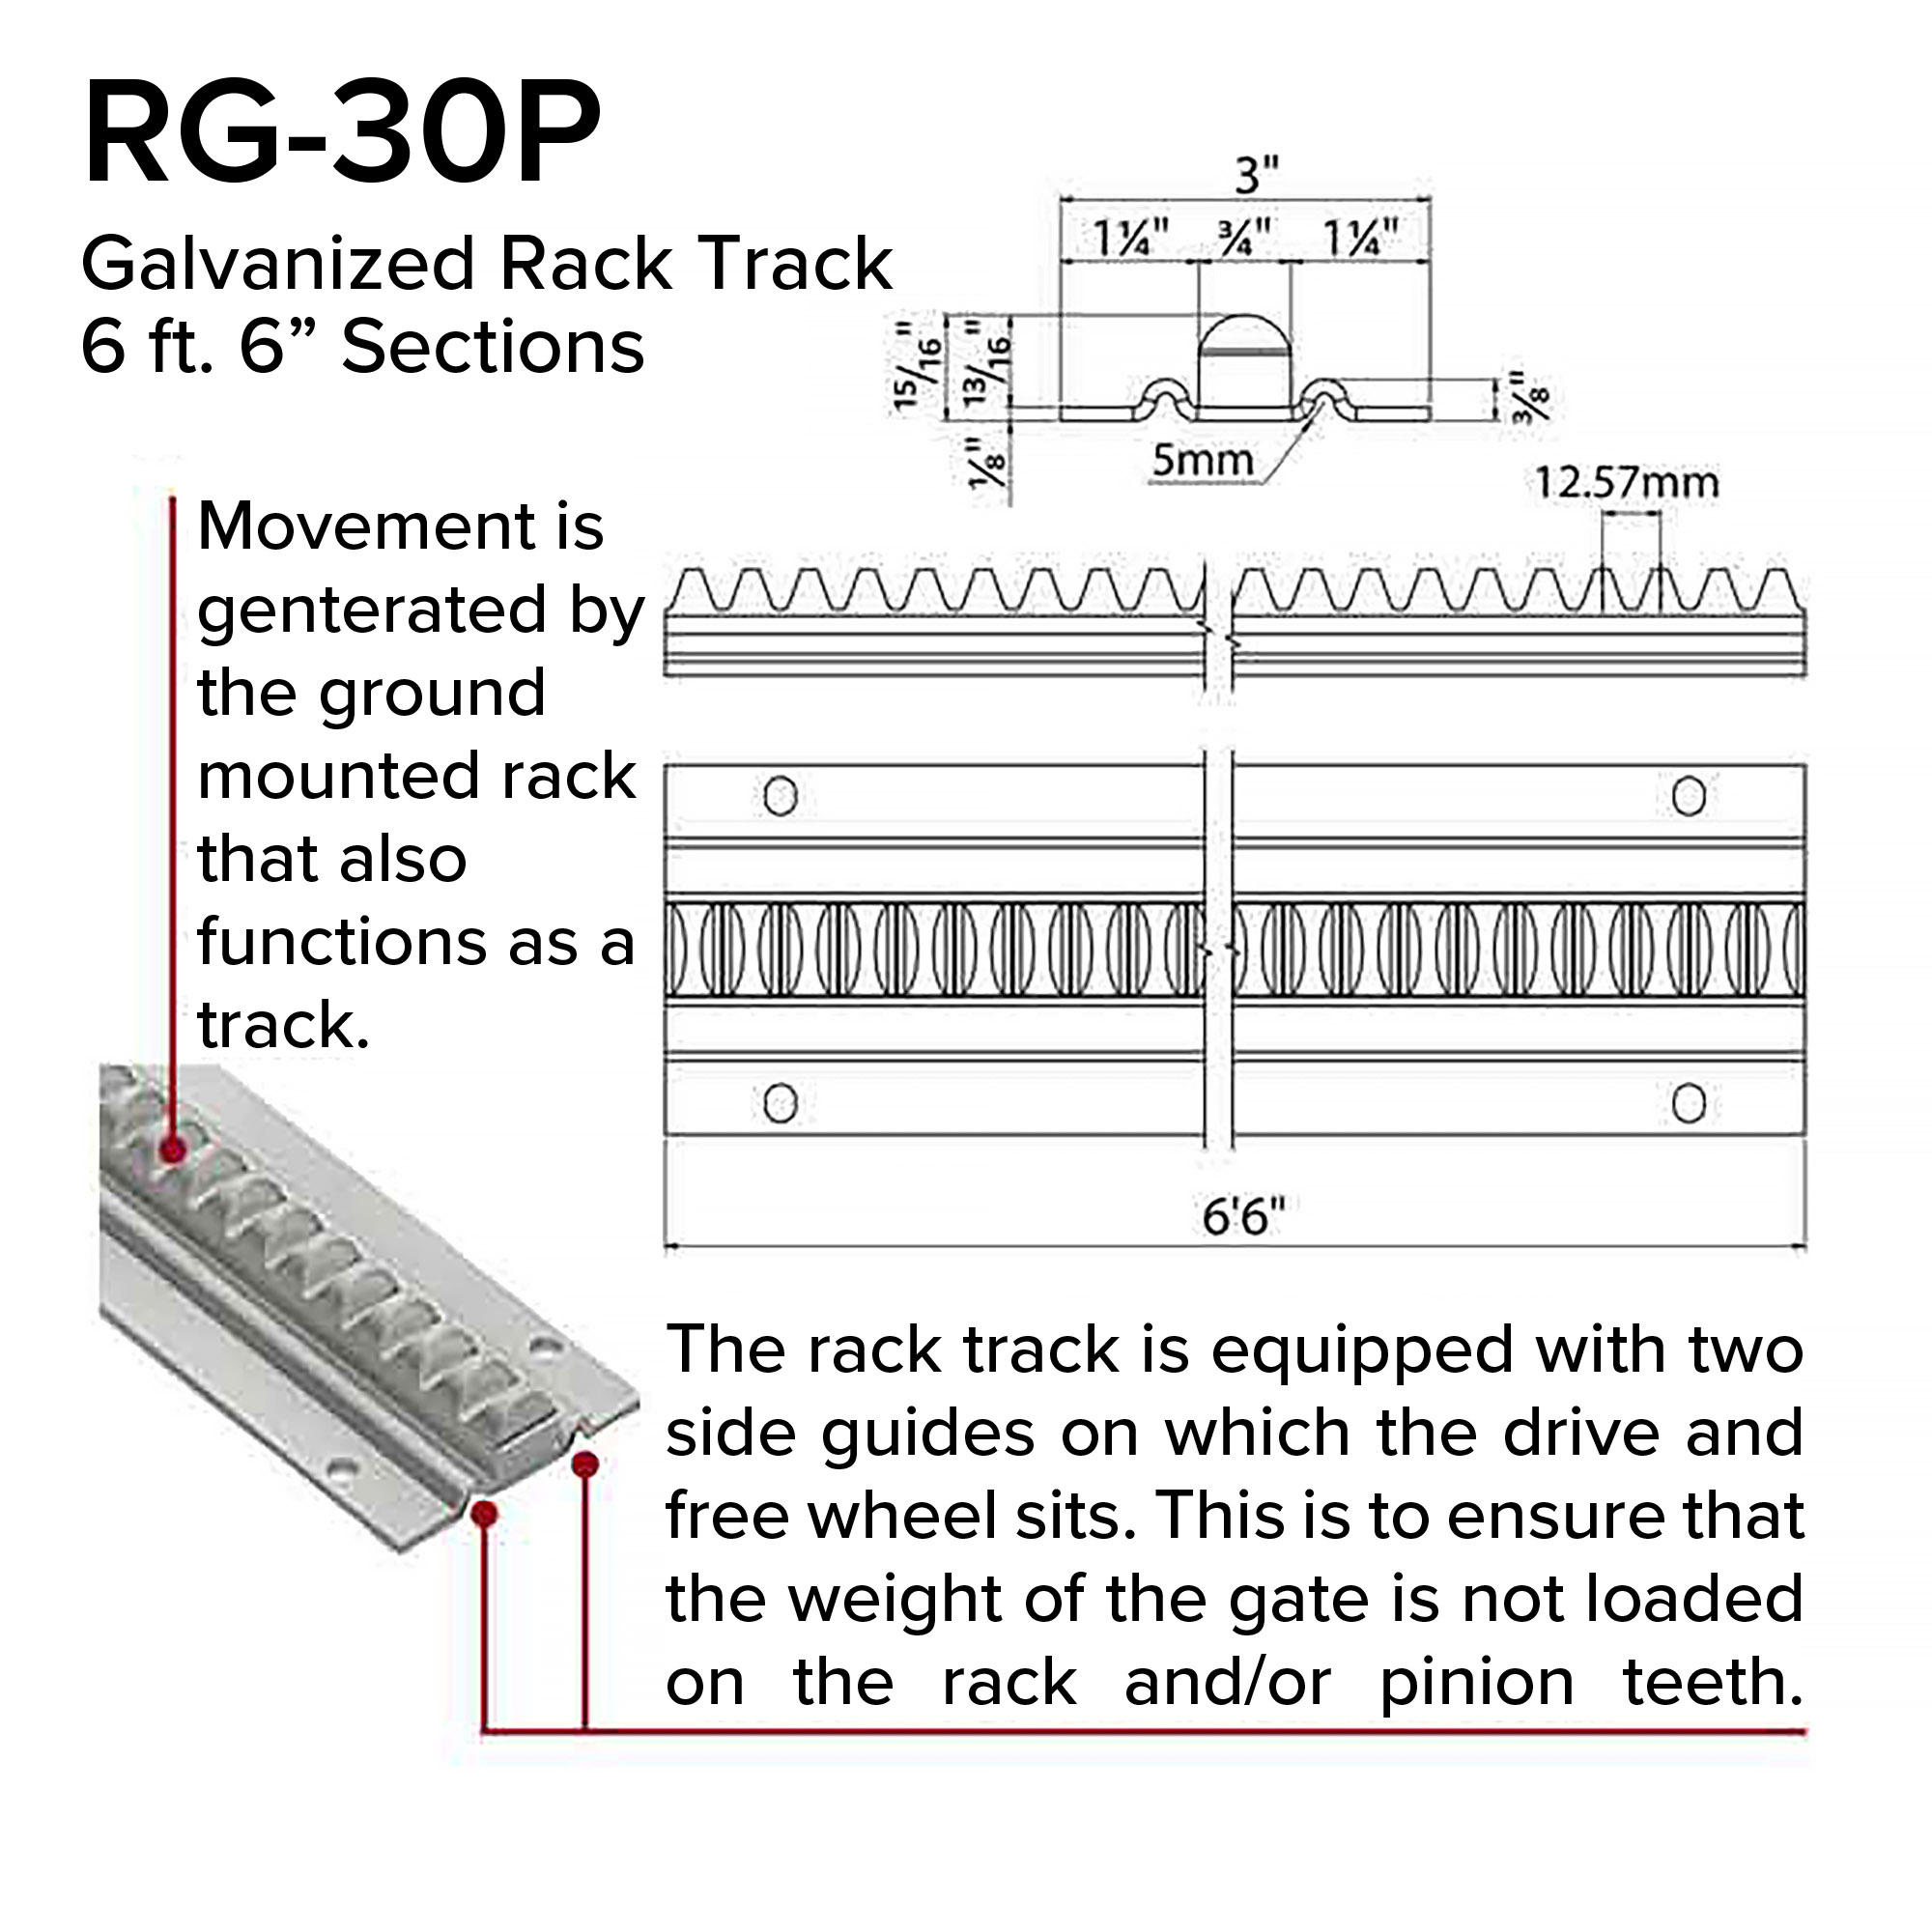 RG-30P Geared Track For Ranger Telescoping Gate Systems - Diagram